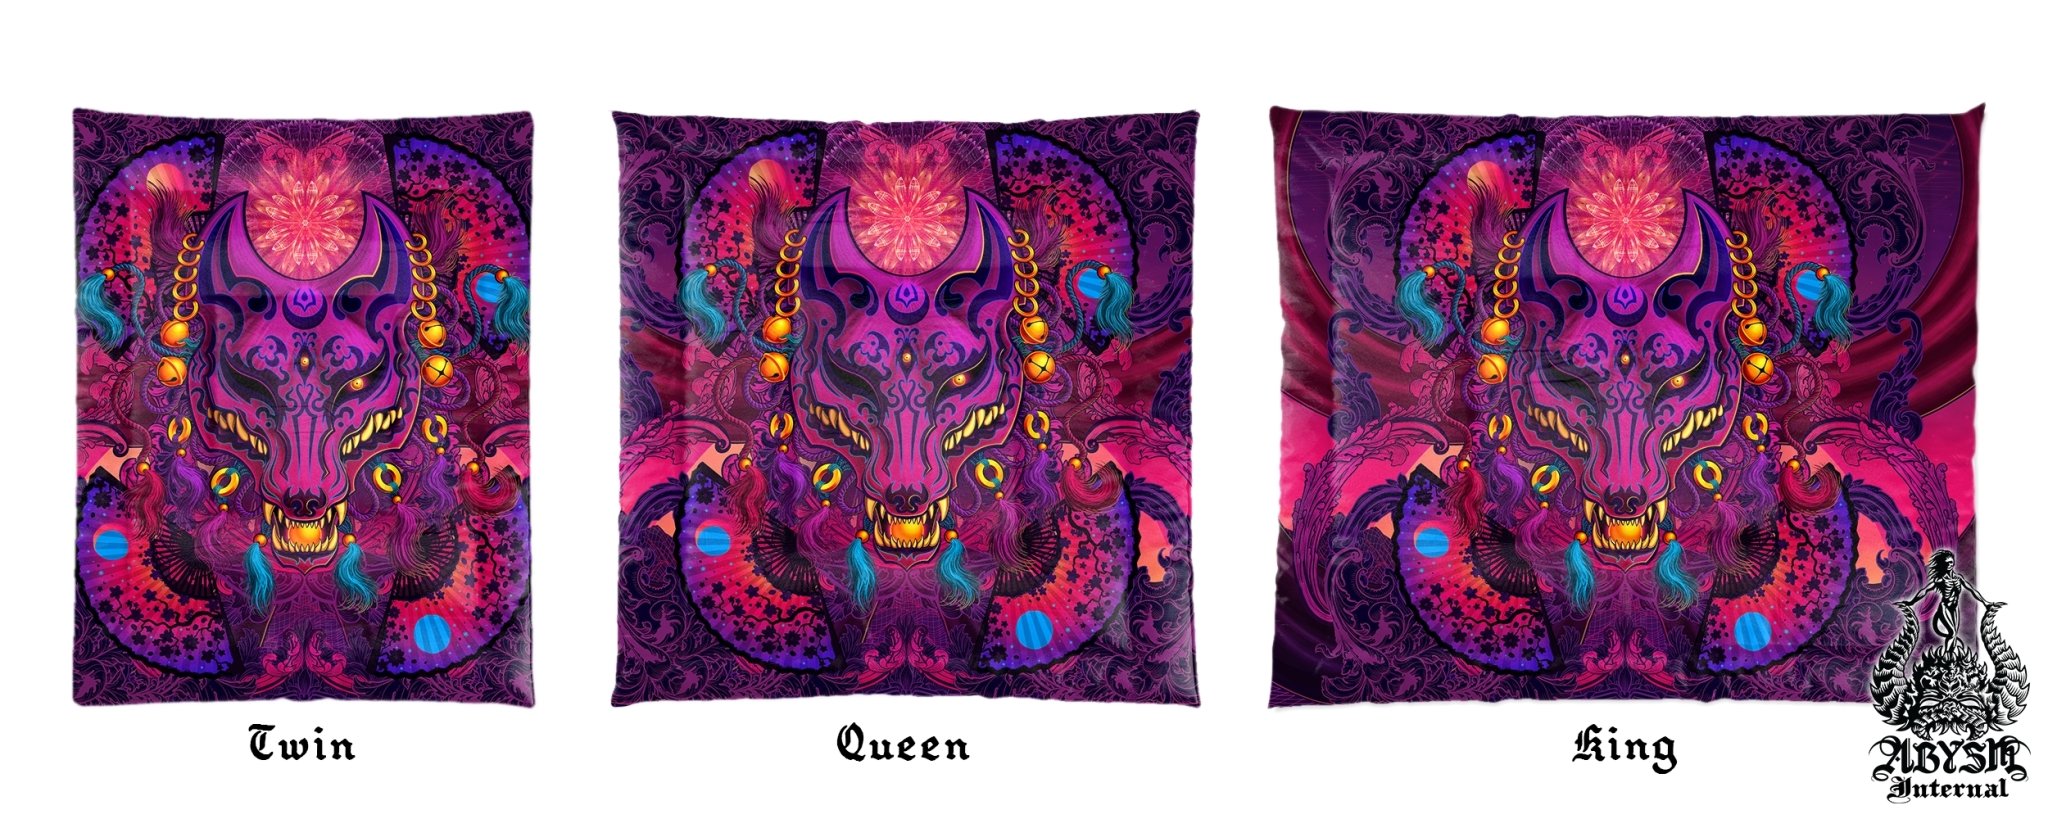 Japanese Vaporwave Bedding Set, Comforter and Duvet, Anime Bed Cover and Retrowave Bedroom Decor, King, Queen and Twin Size, Psychedelic Synthwave, 80s Gamer Room Art - Kitsune - Abysm Internal